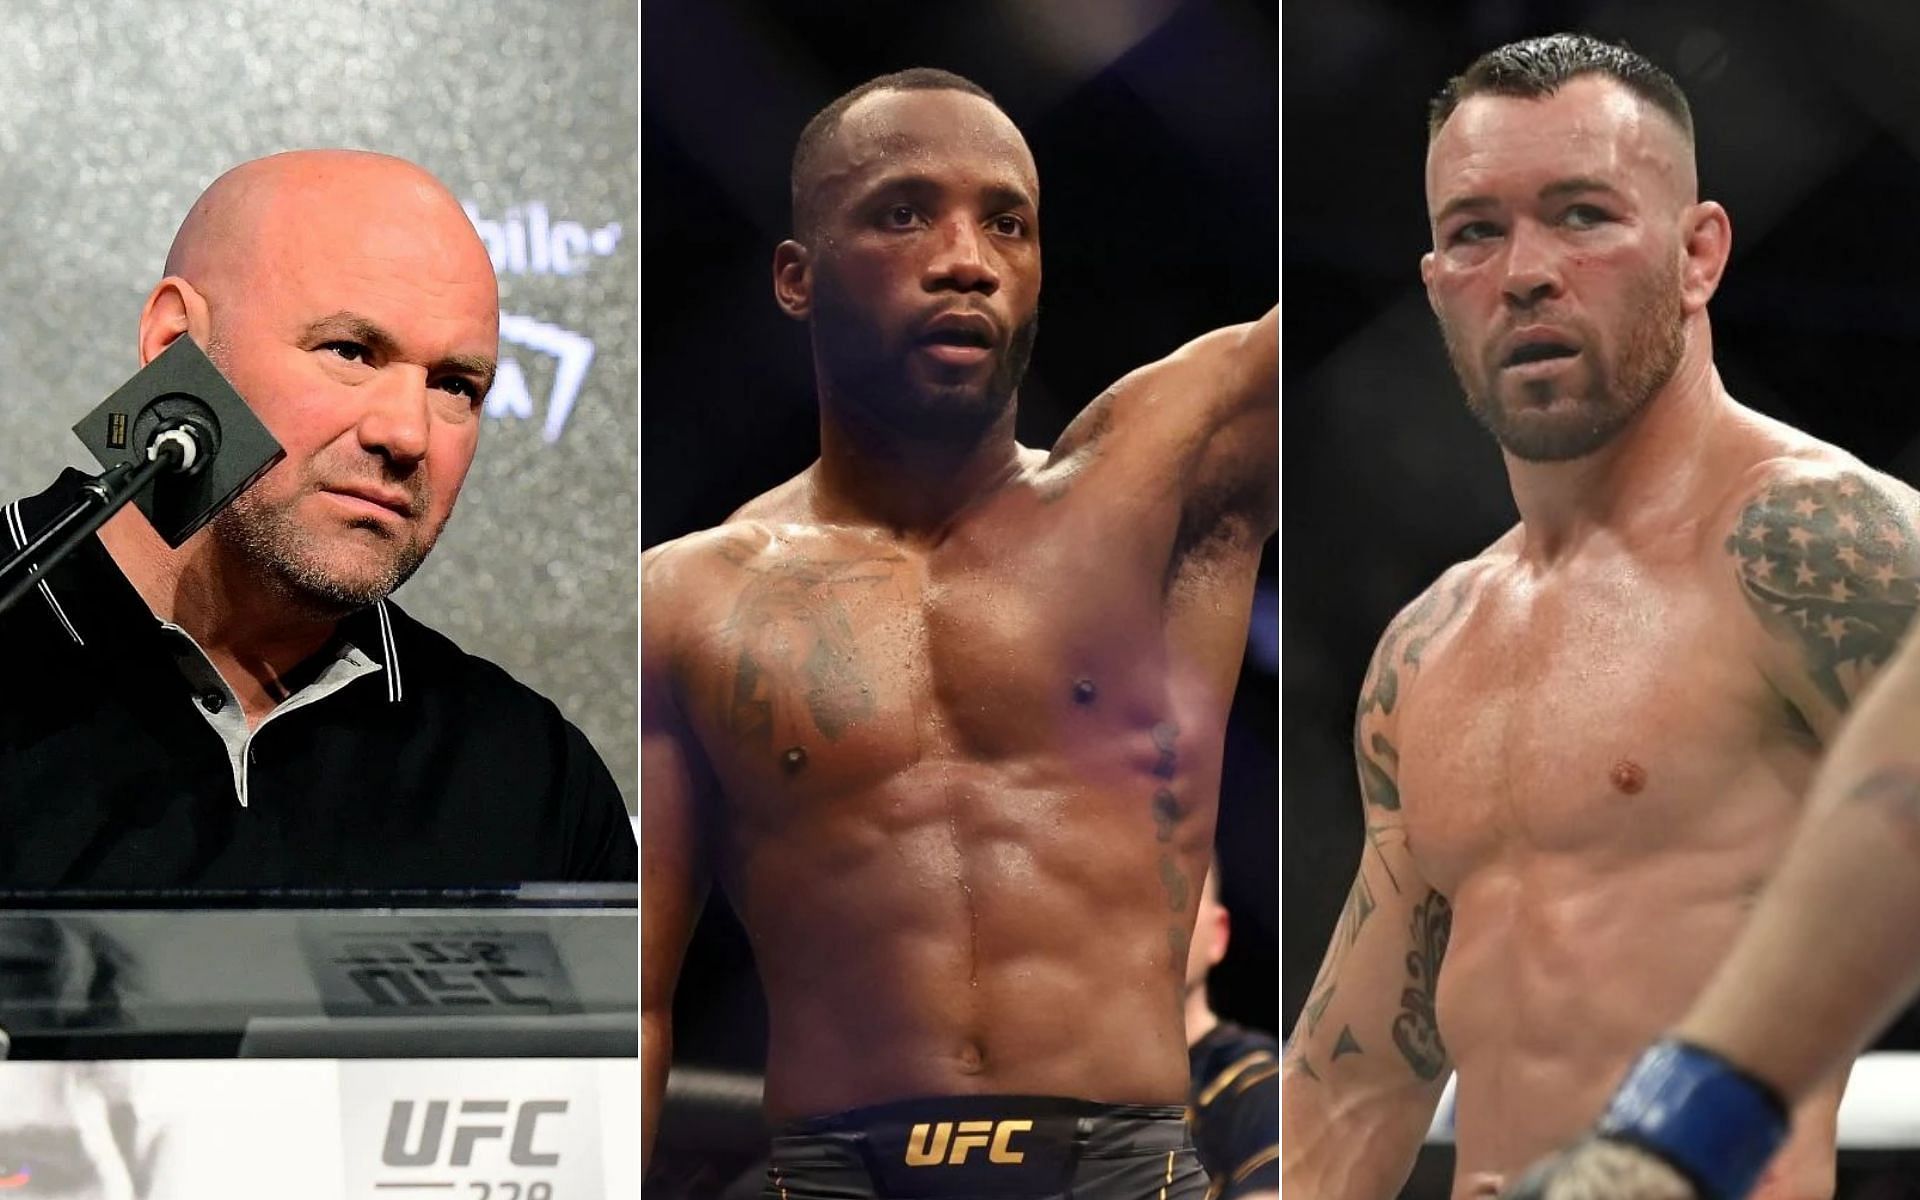 Dana White [Left], Leon Edwards [Middle], and Colby Covington [Right]